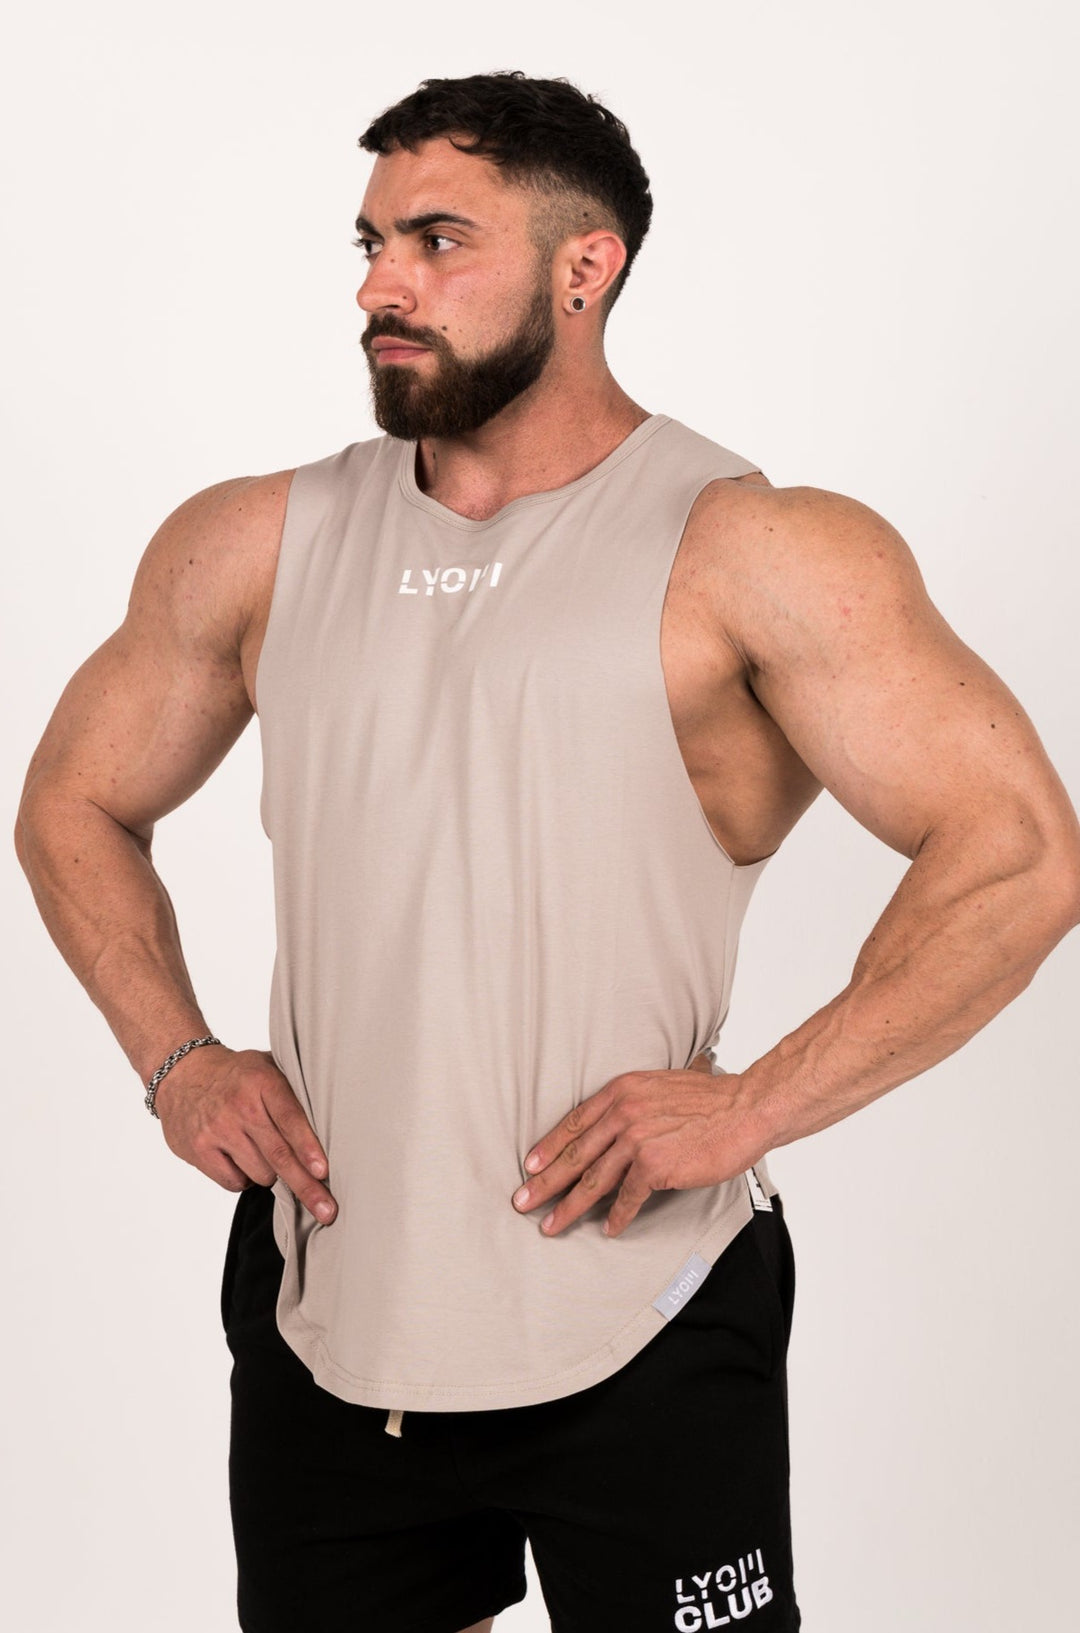 ➤ Weightlifting Clothing - Men's Weightlifting Clothing